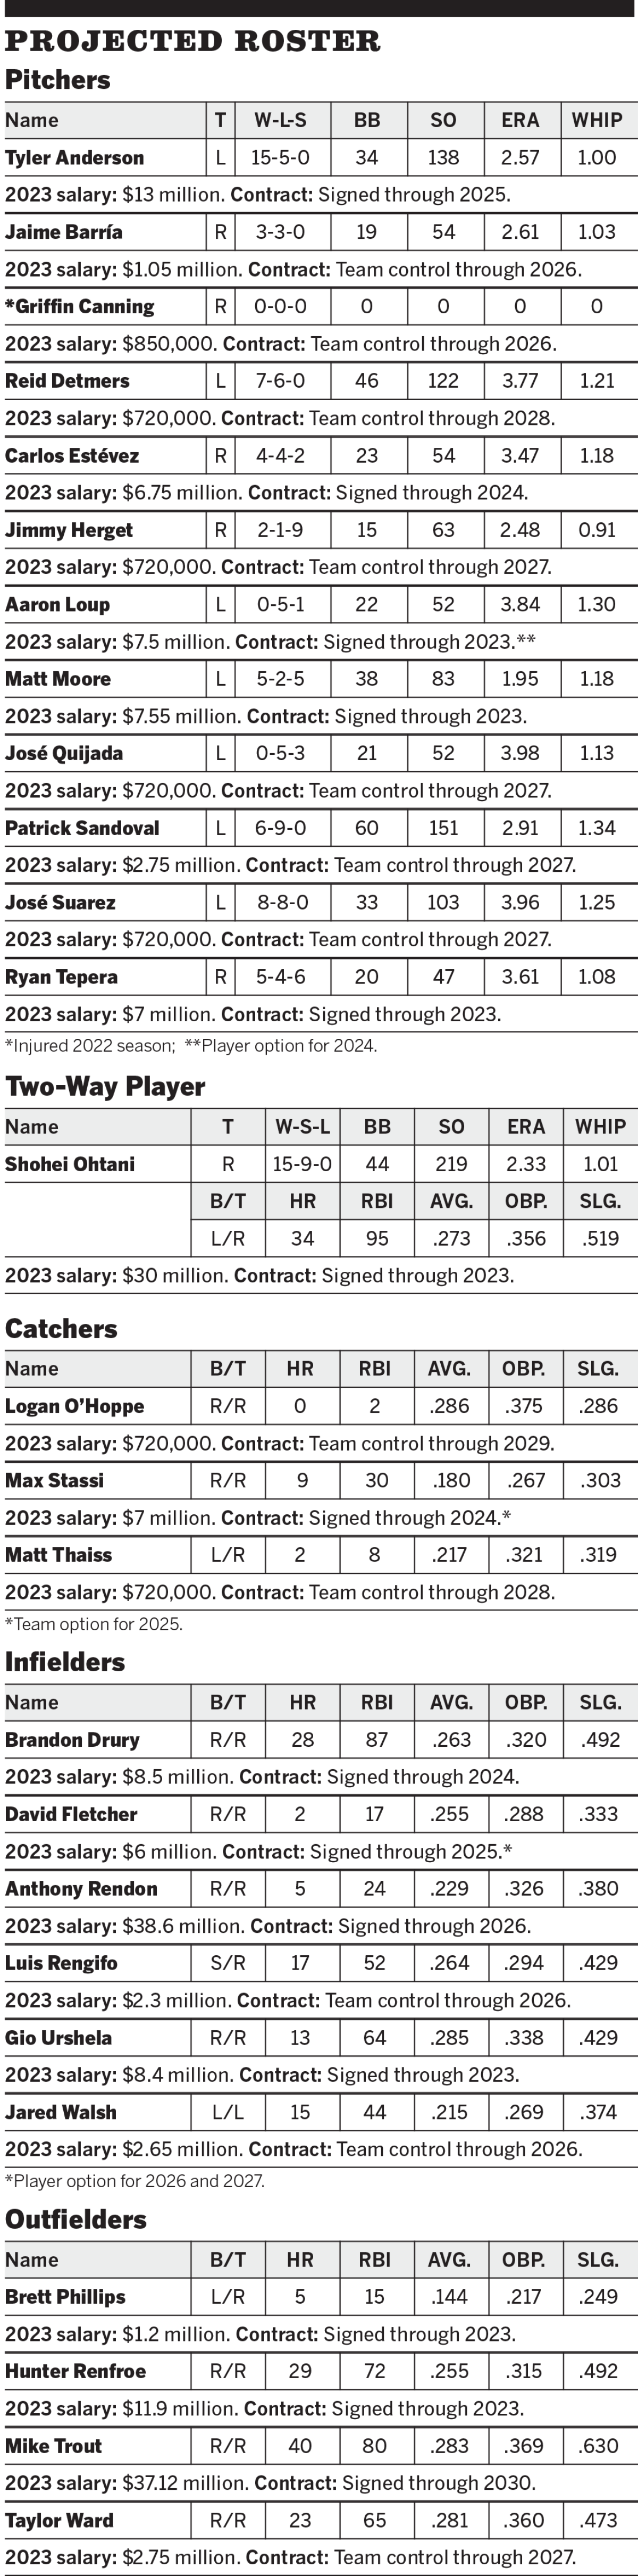 Projected Angels roster for 2023.